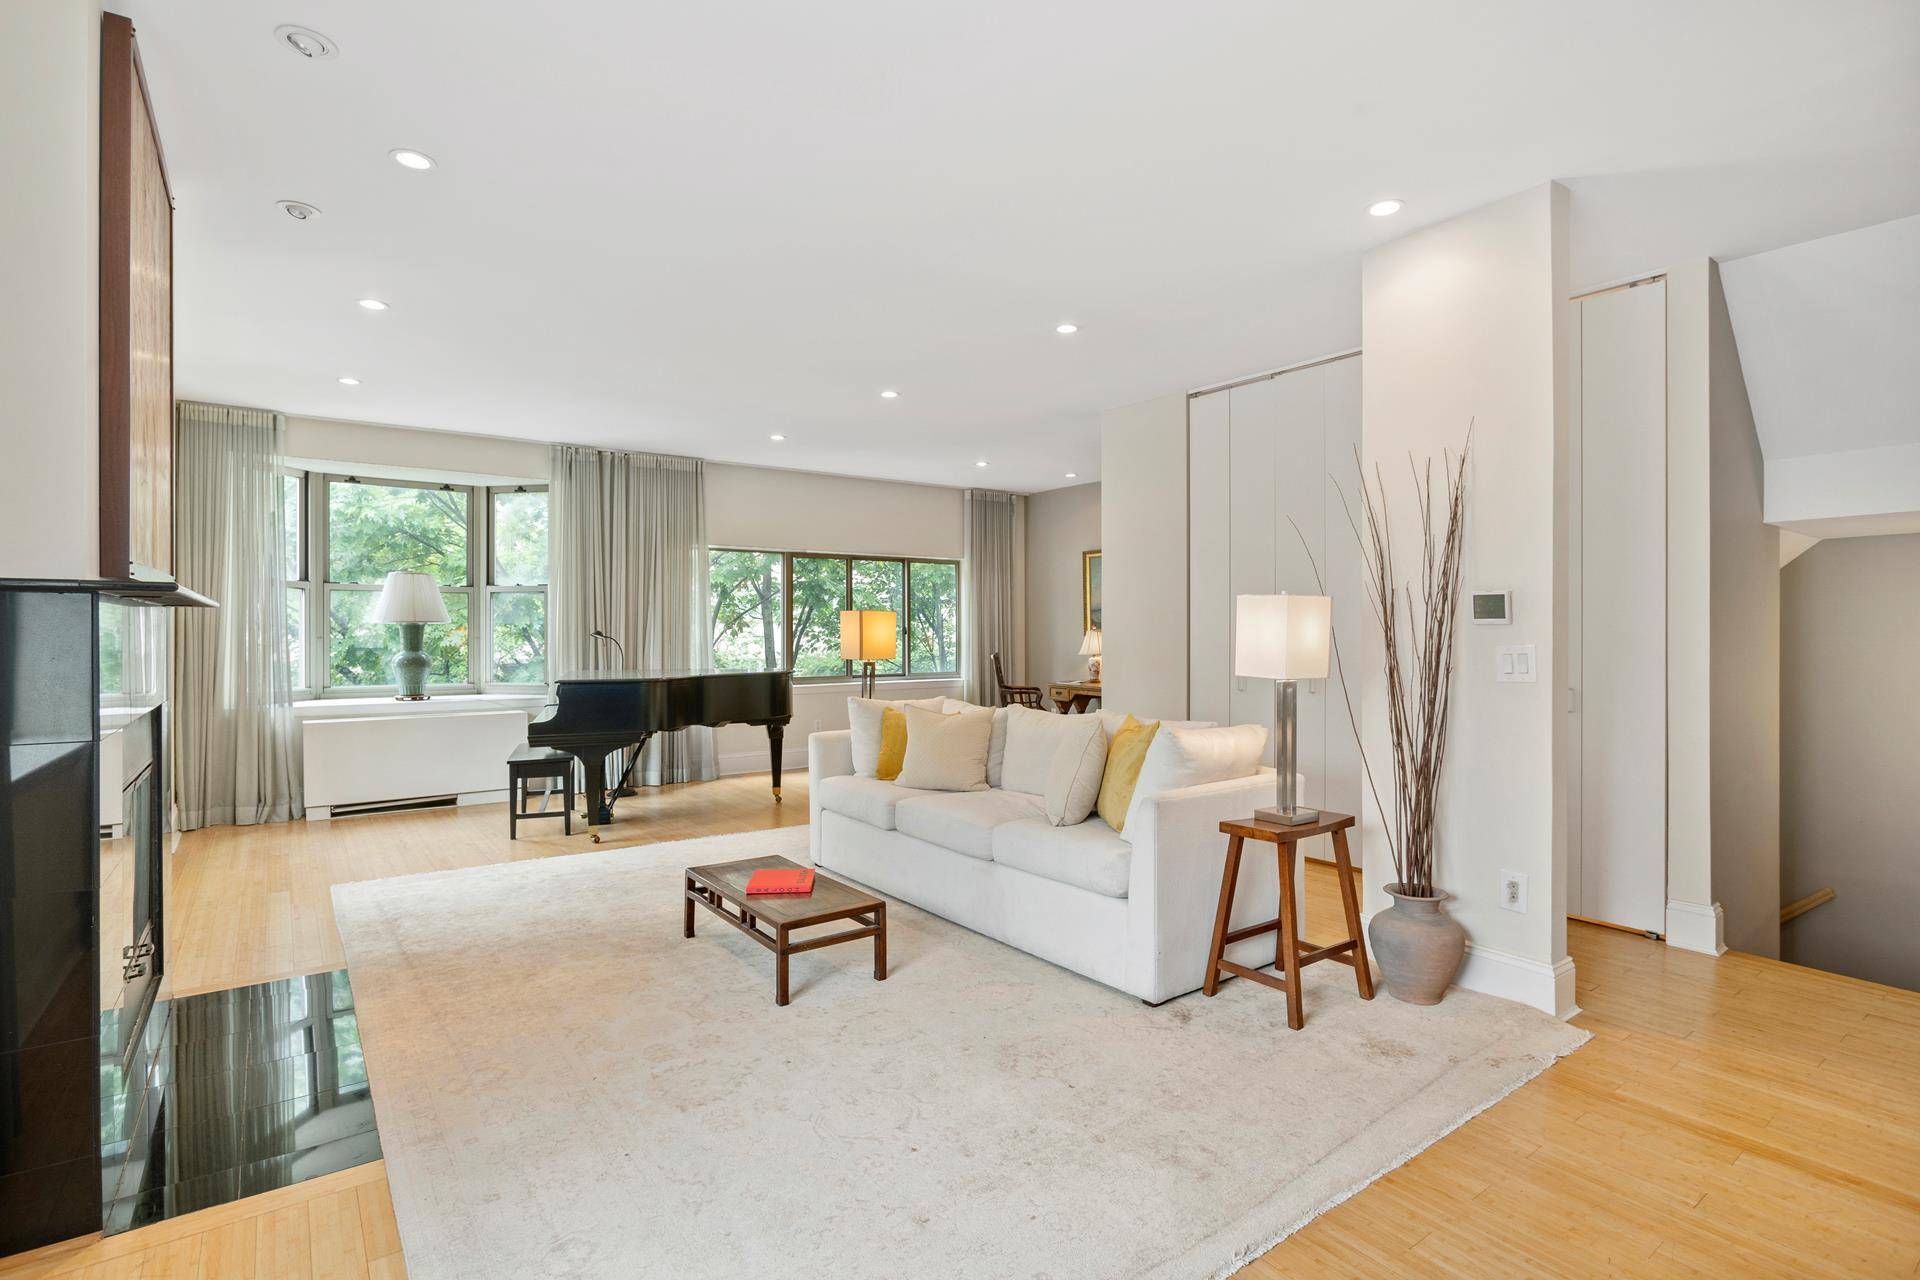 Stunning Townhouse Condo at 1400 Fifth Avenue A Serene Urban RetreatDiscover the perfect blend of urban living and tranquil retreat in this exclusive four bedroom, 3.